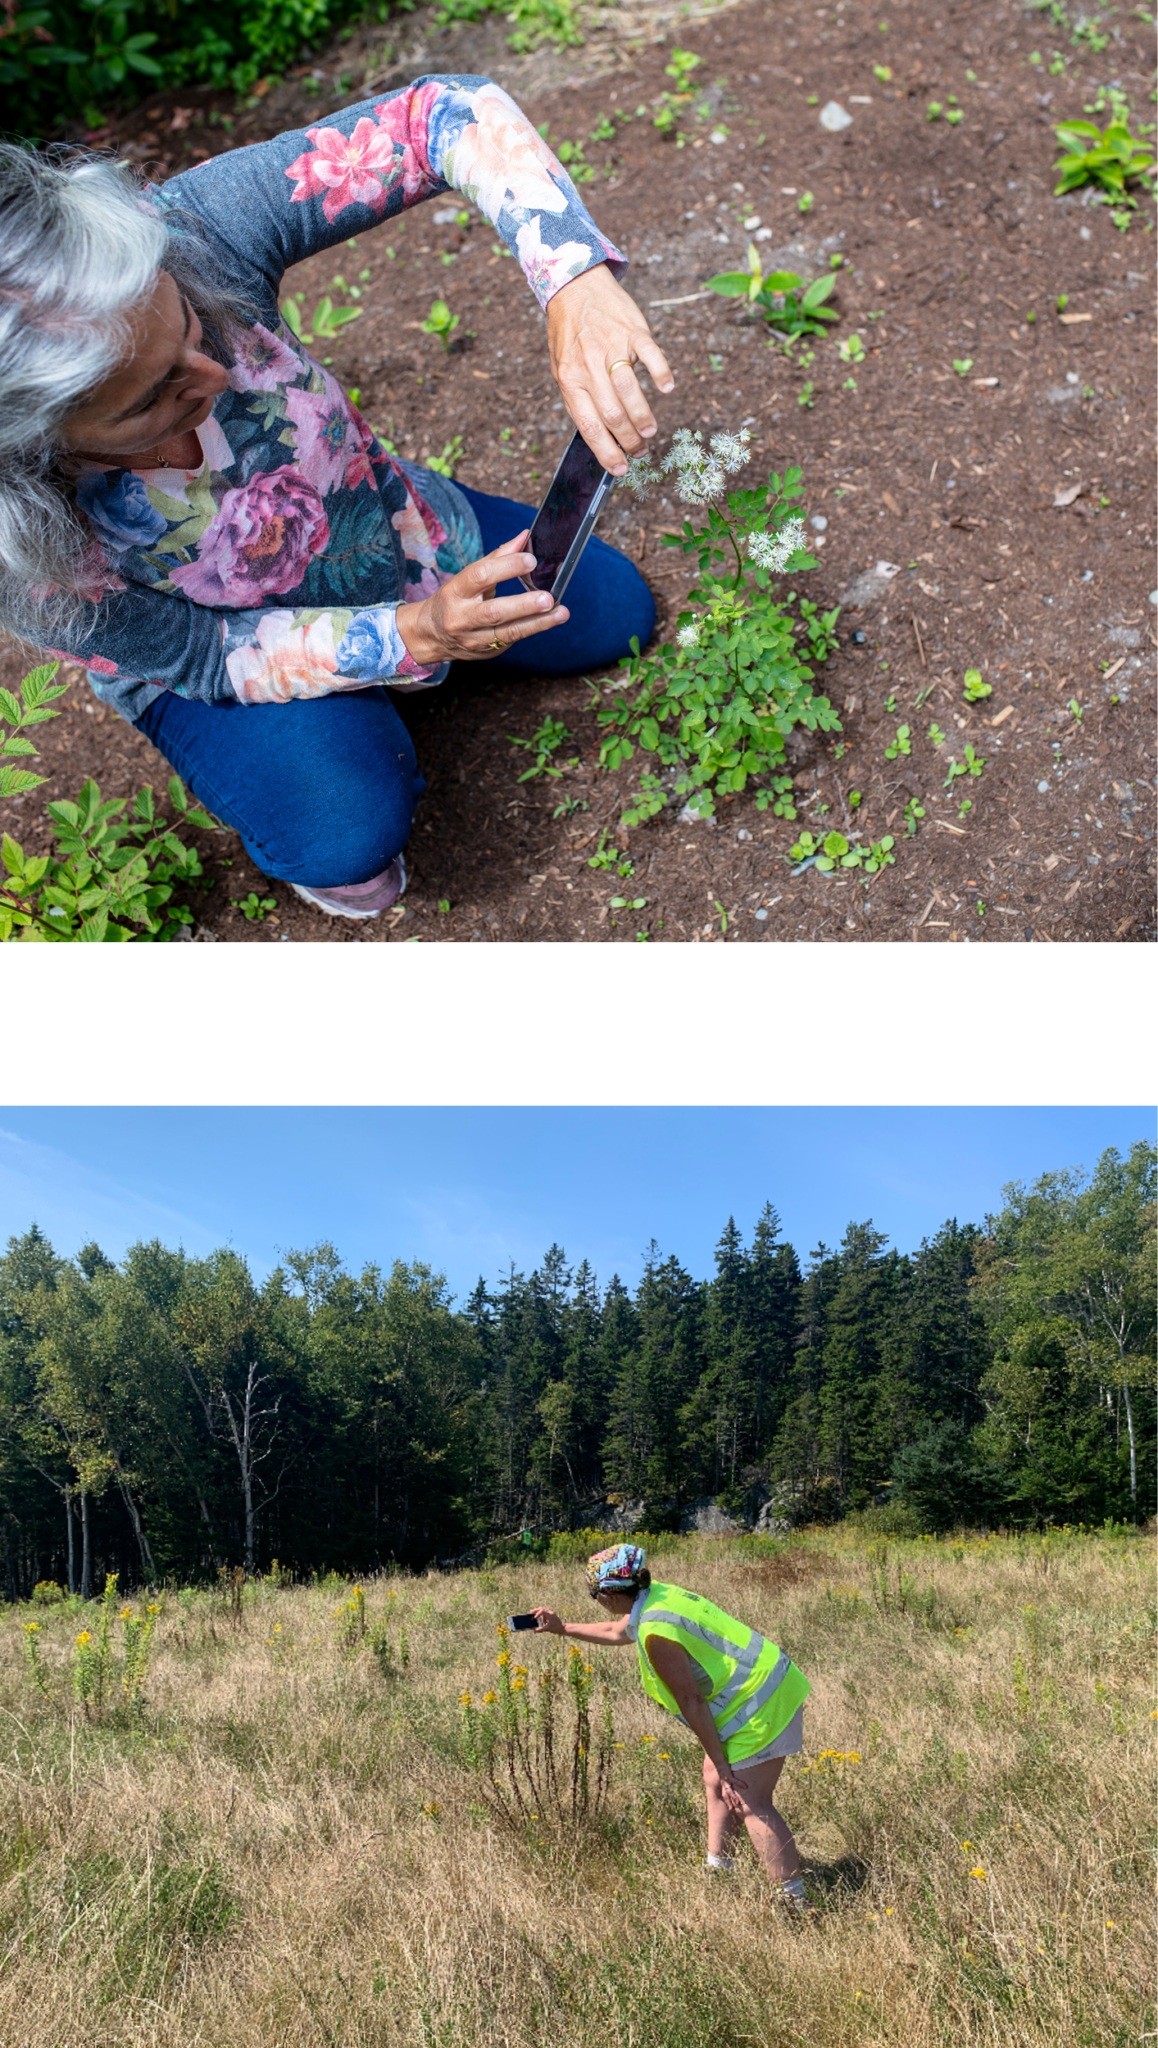 Top photo: a person holding their photo to take a photo of a plant while kneeling on the ground. Bottom photo: a person stands in a field holding a cellphone to take a photo. The treeline is shown in the background and the sky above is bright and clear.